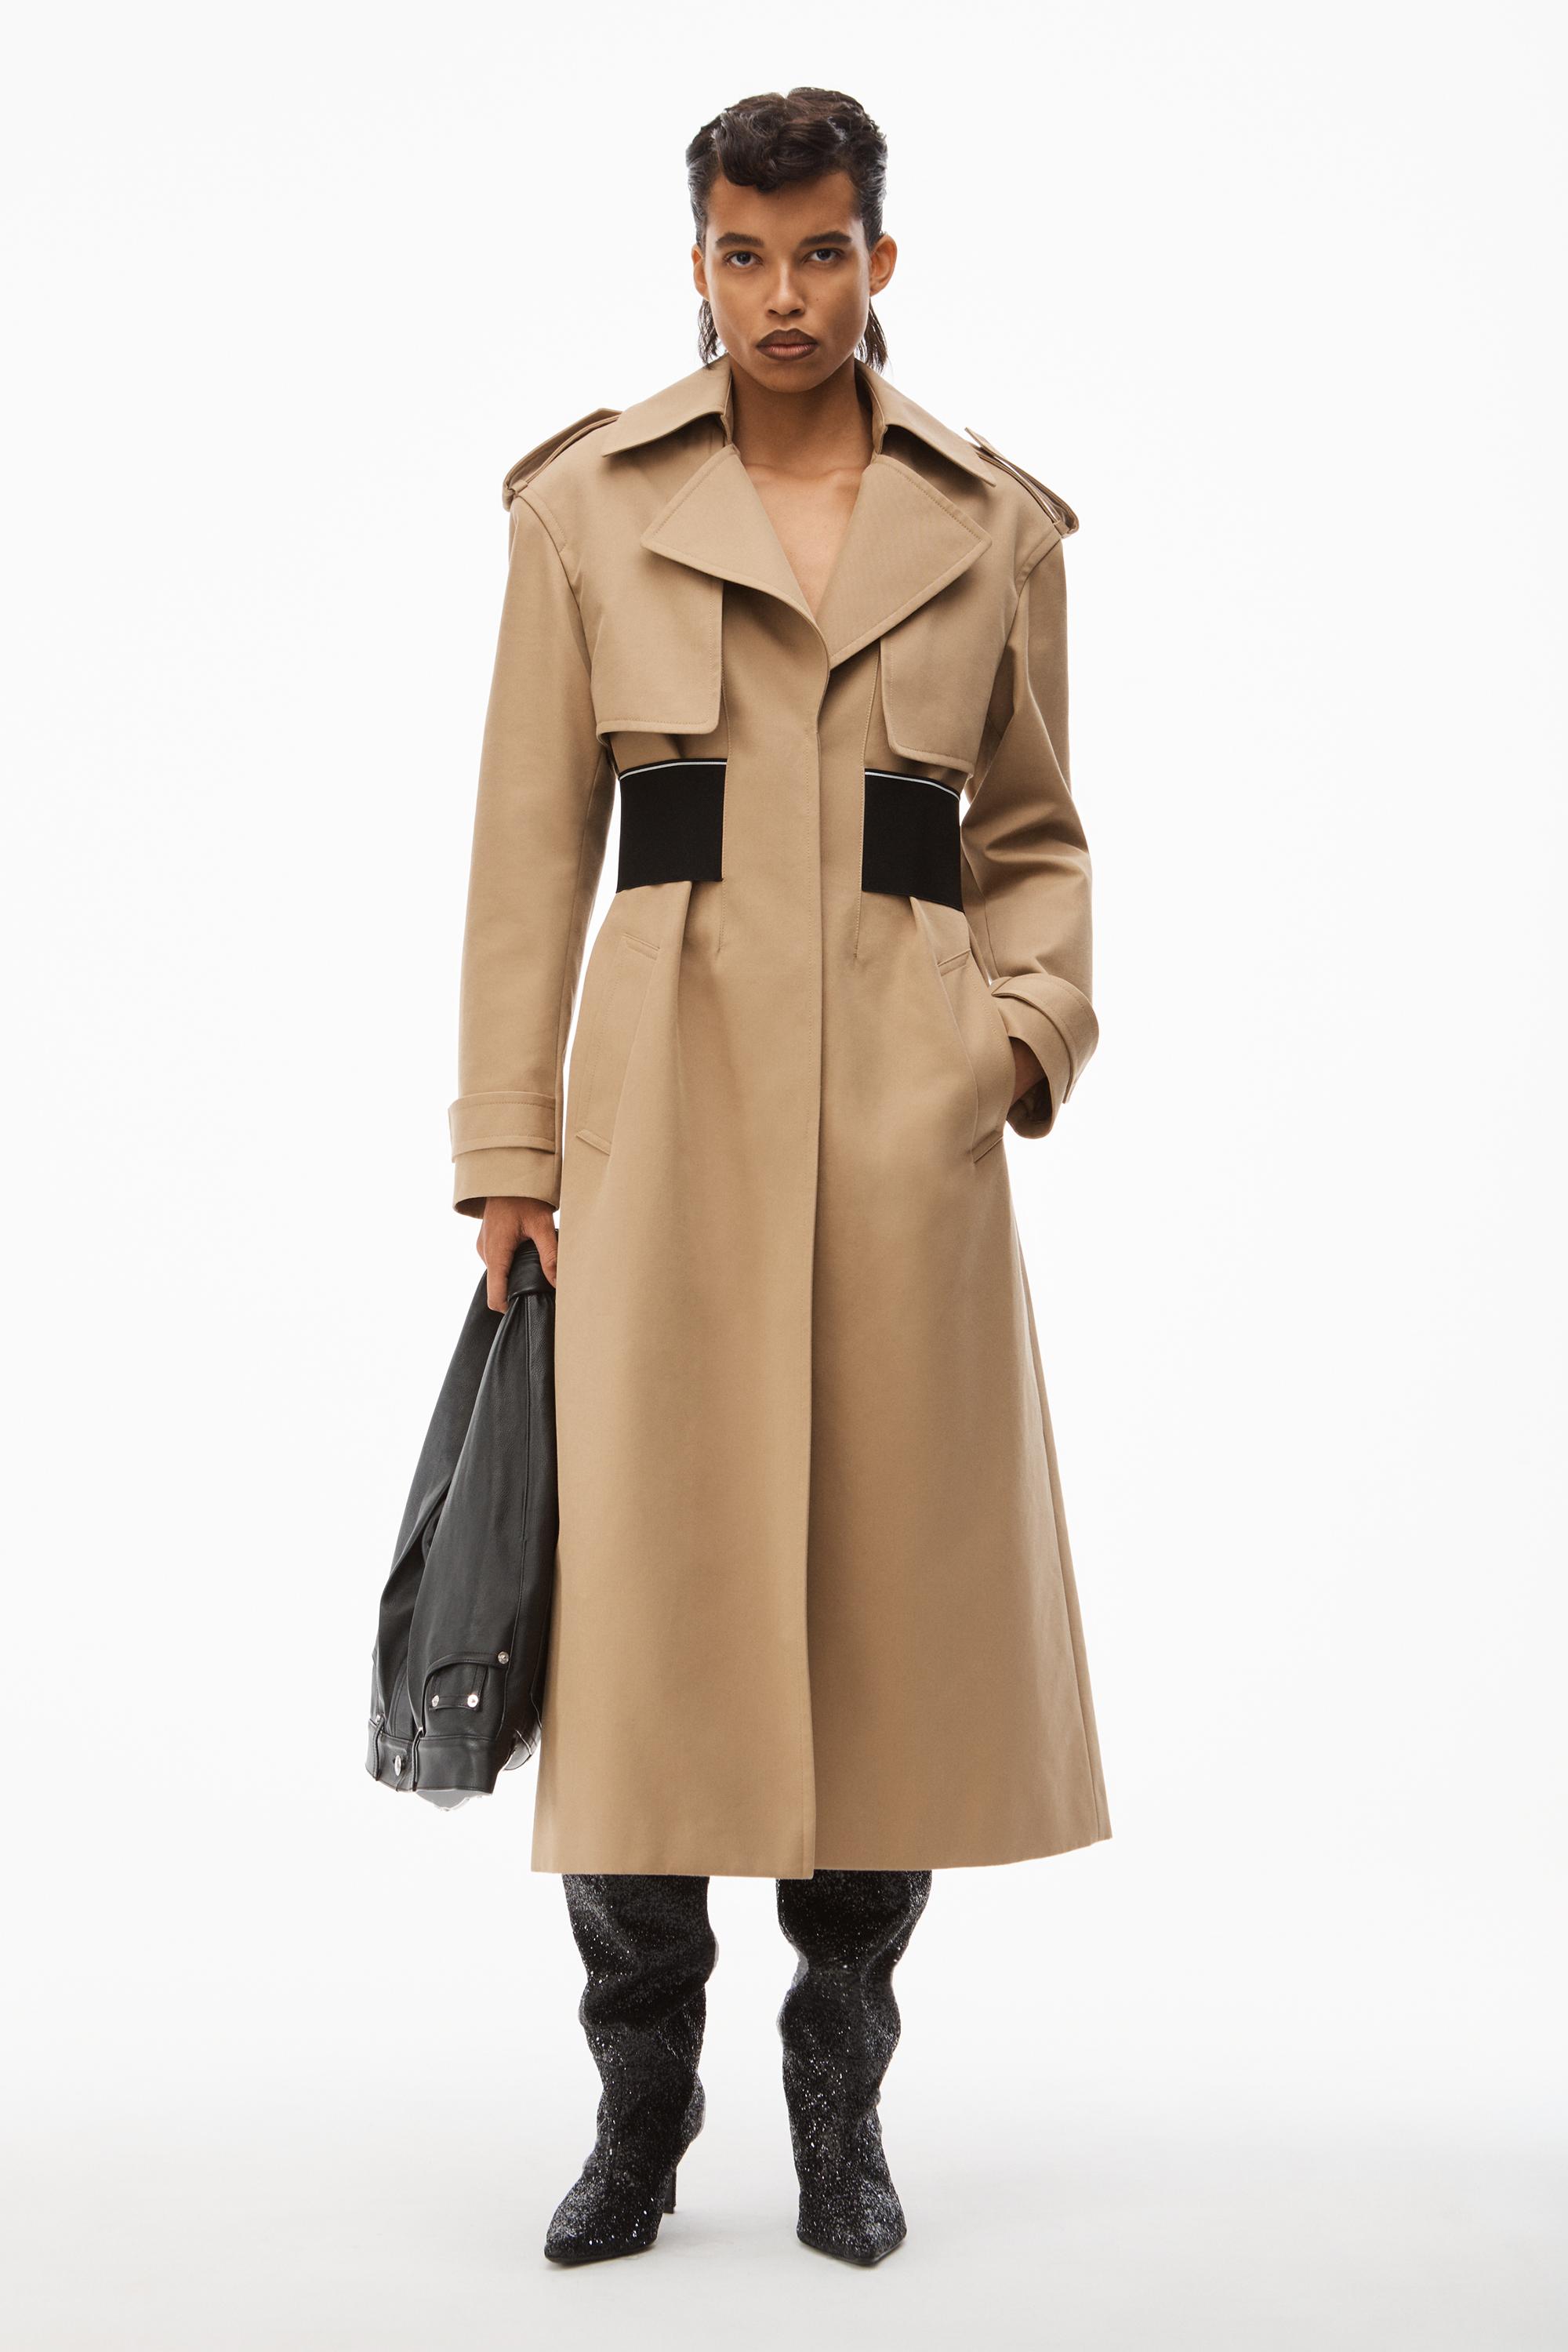 Alexander Wang Logo Trench Coat In Cotton Tailoring in Natural | Lyst